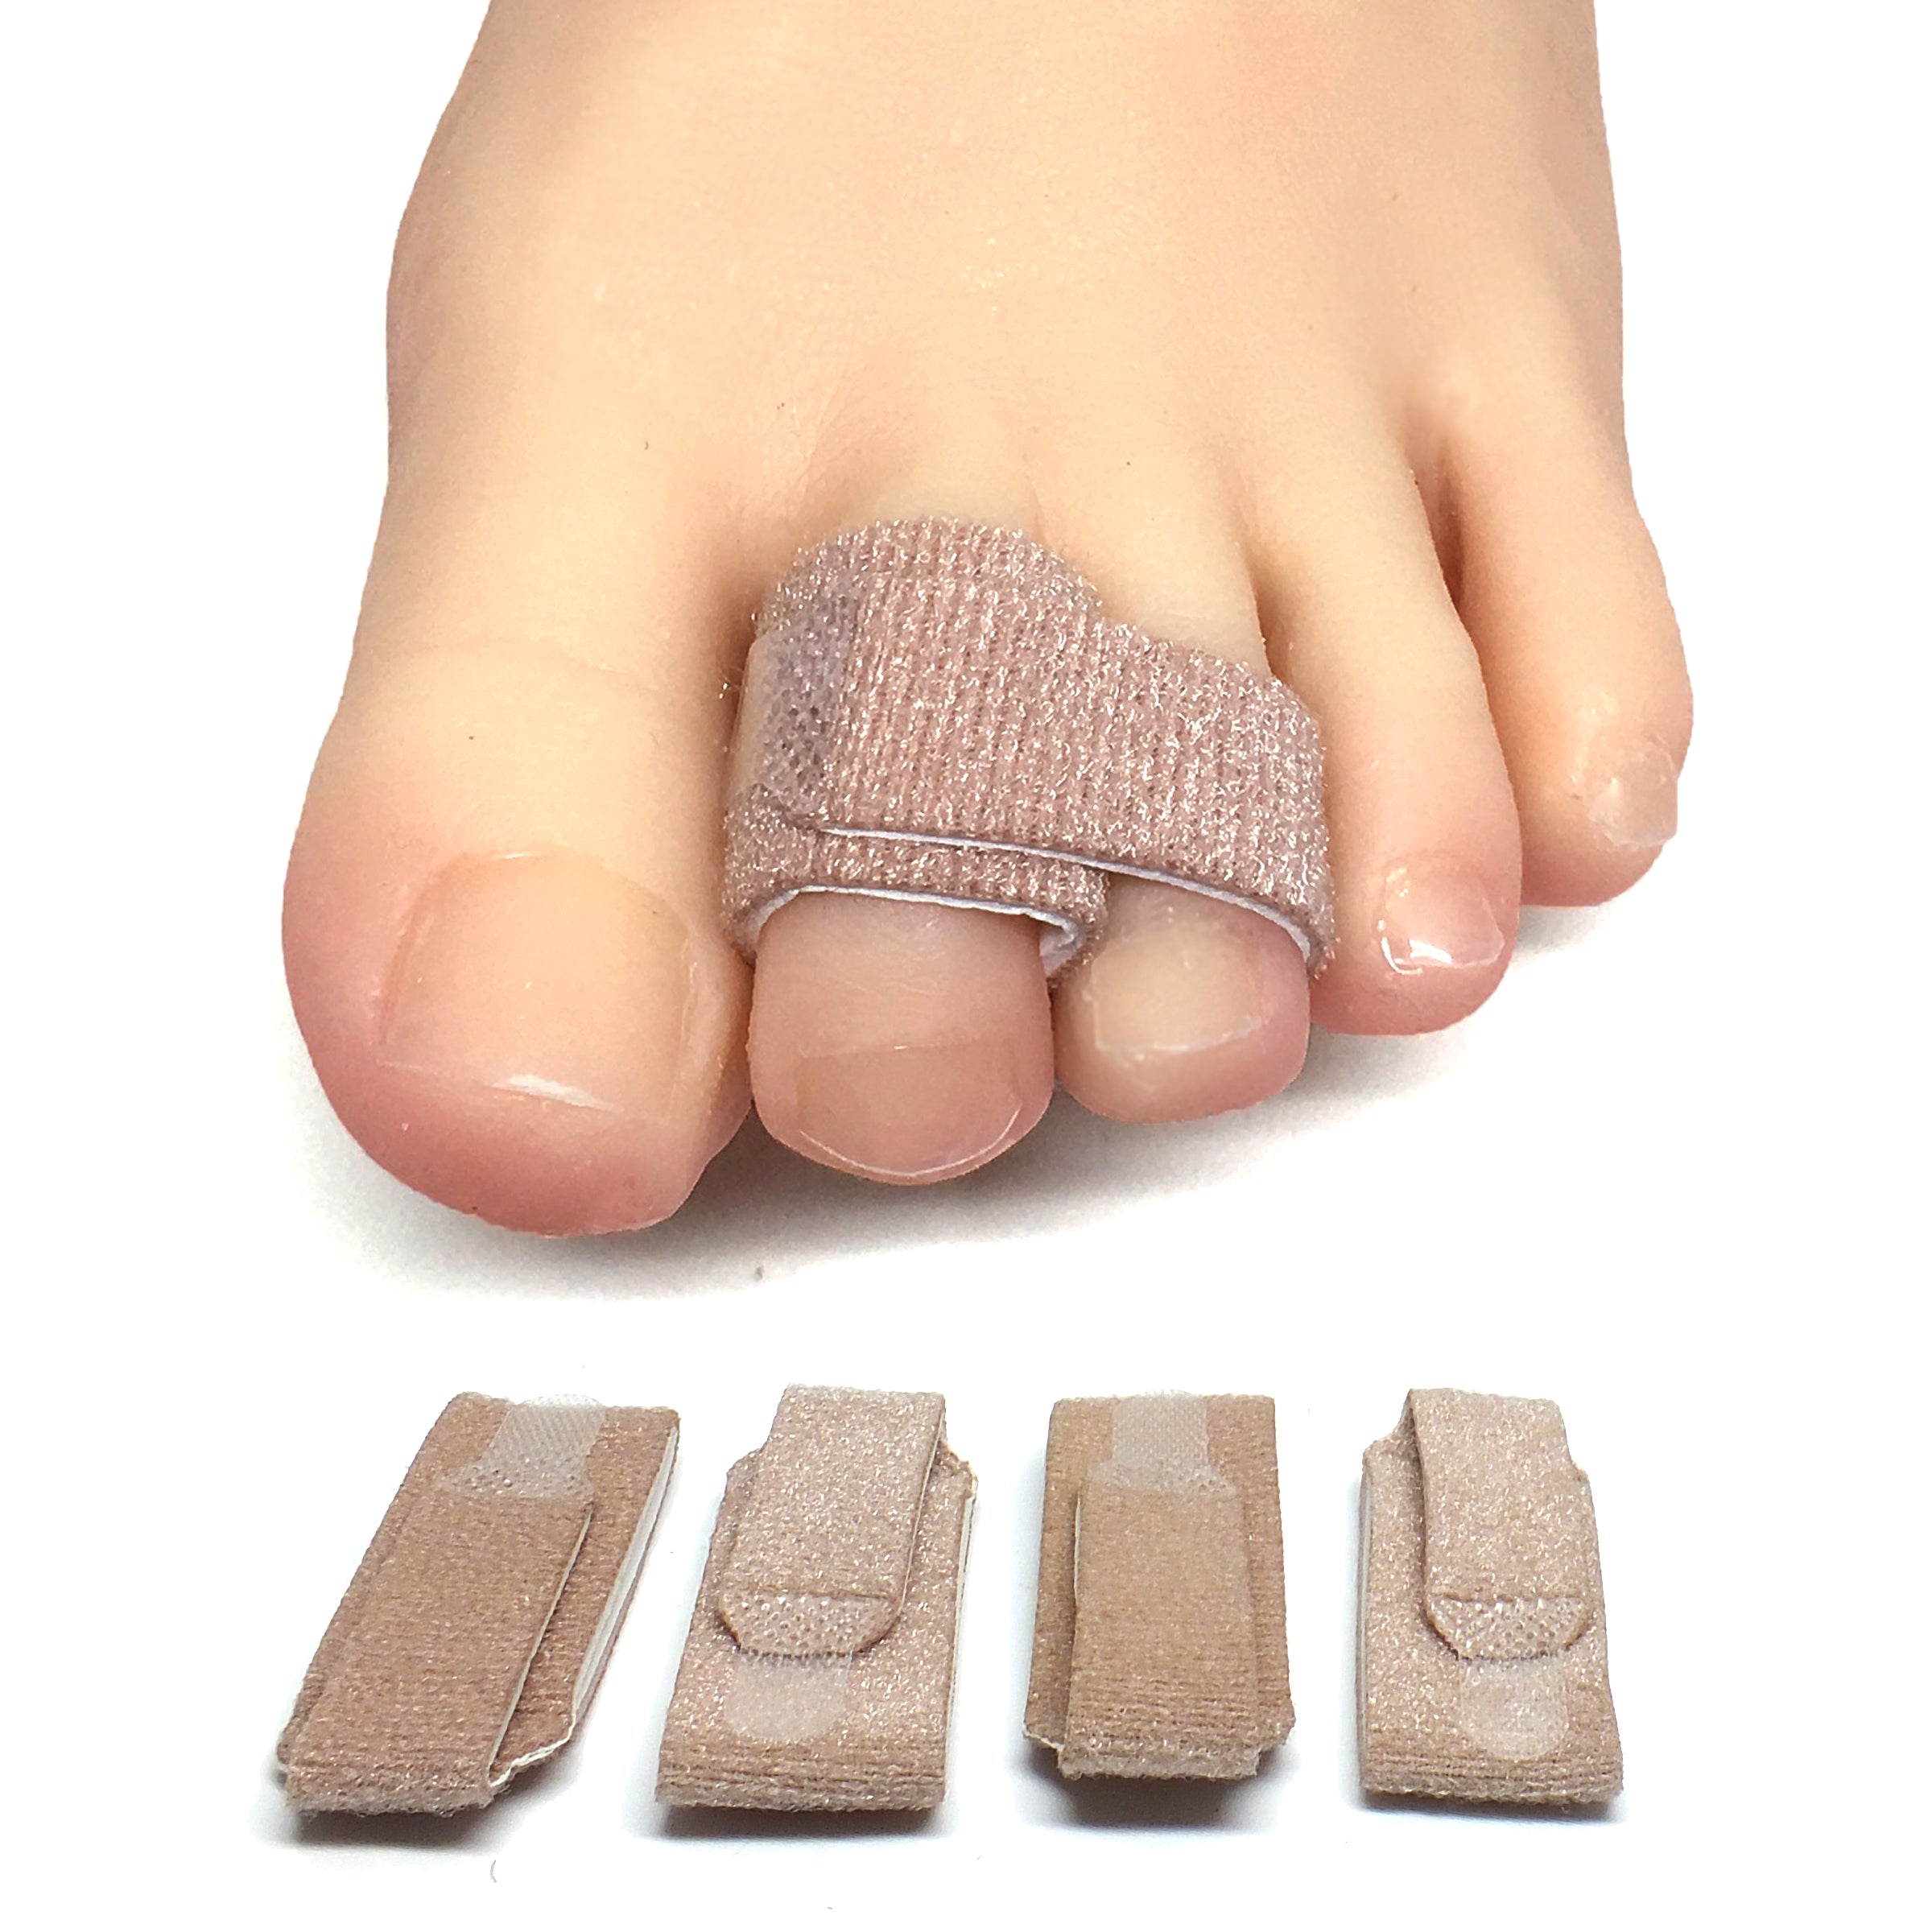 How is Urea used to treat fungal infections of the toe and finger nails? |  MyFootShop.com